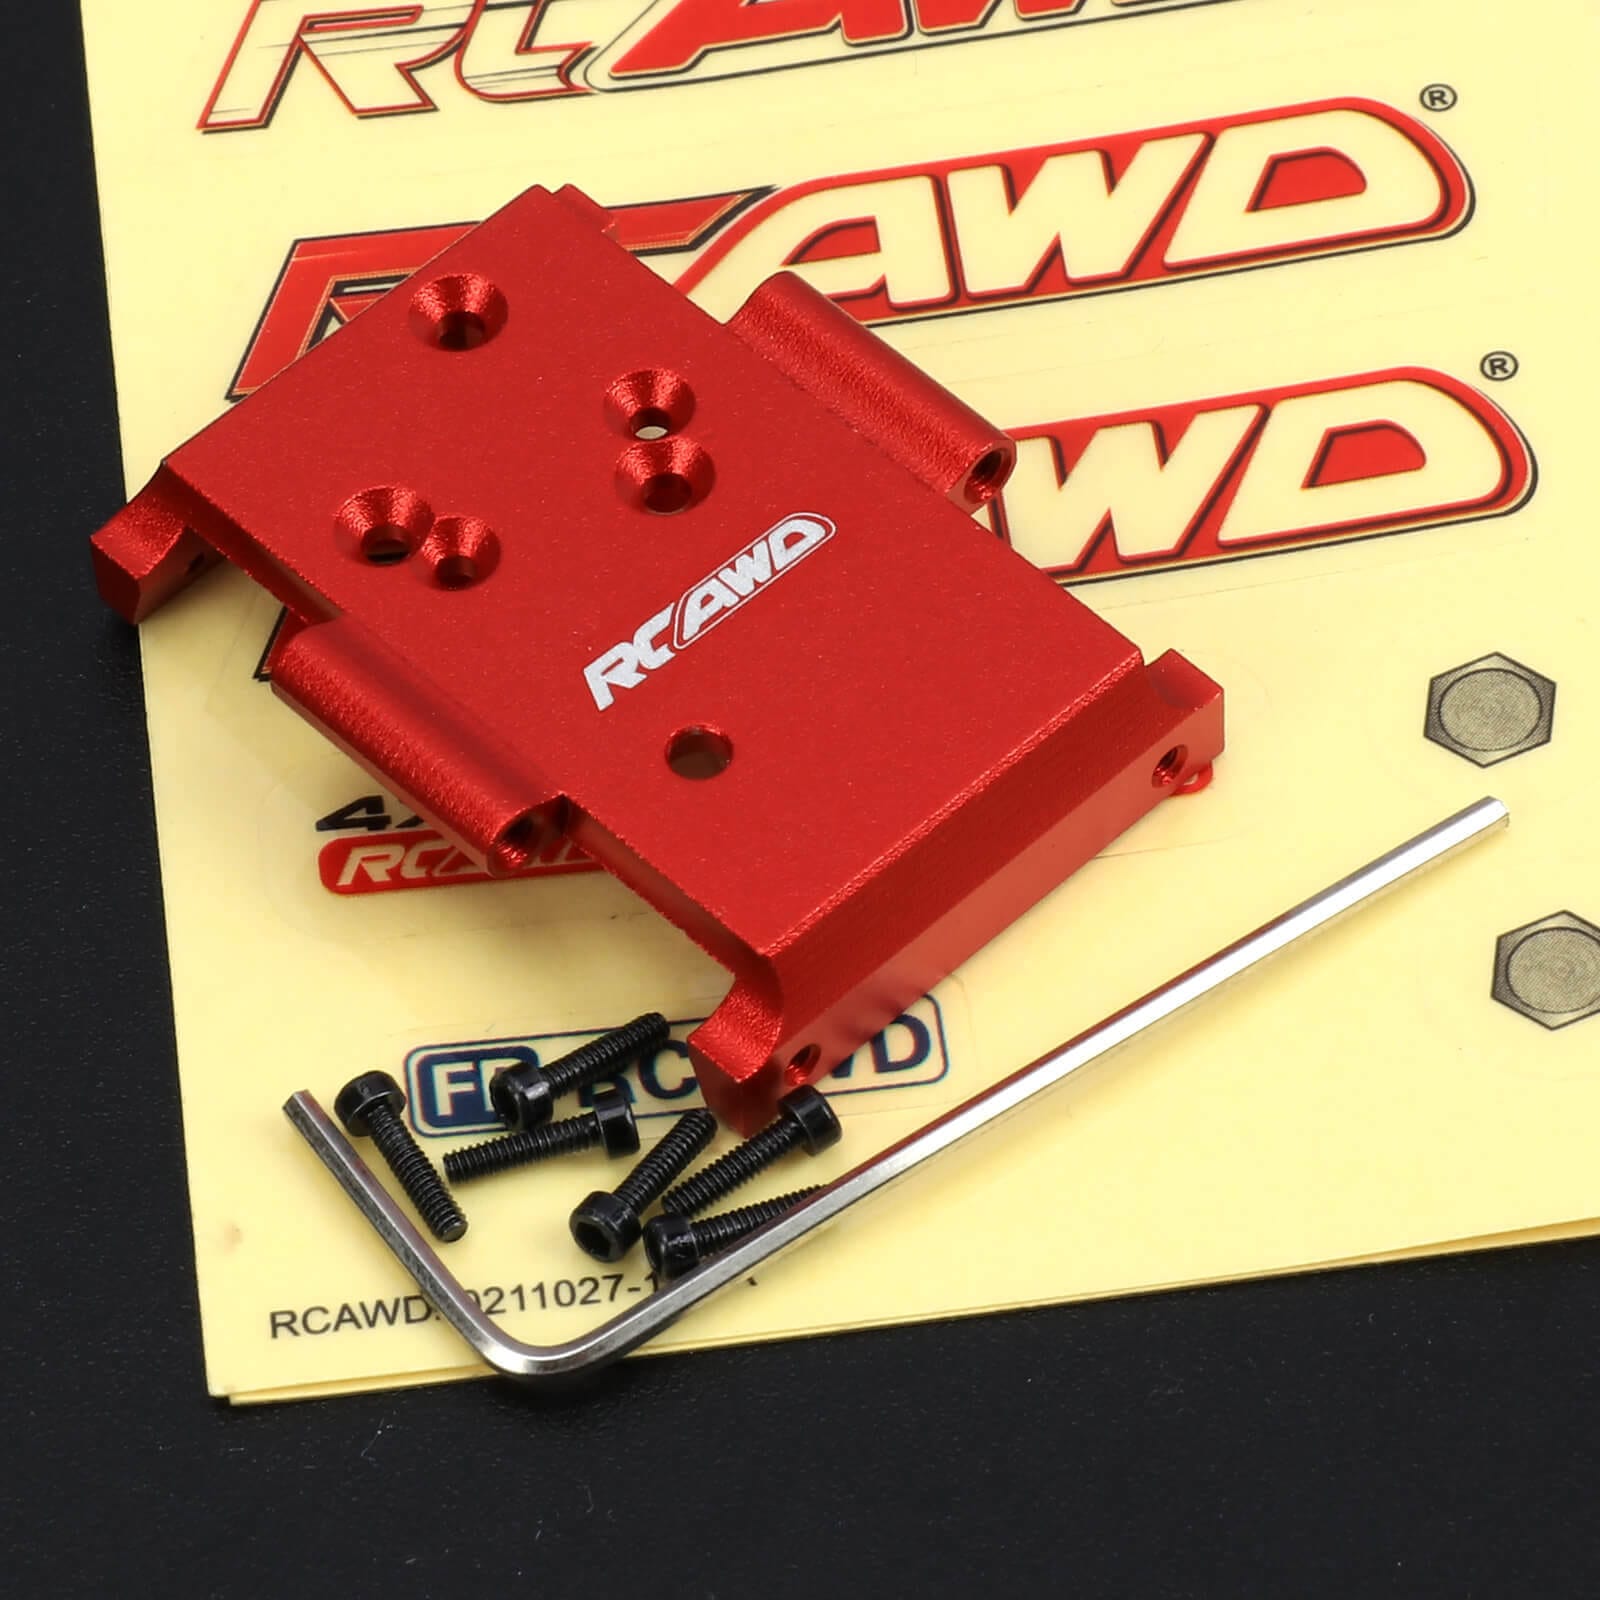 RCAWD HobbyPlus CR18 HobbyPlus CR18 Upgrades Metal Gearbox Combo Transmission Mount Plate 240302